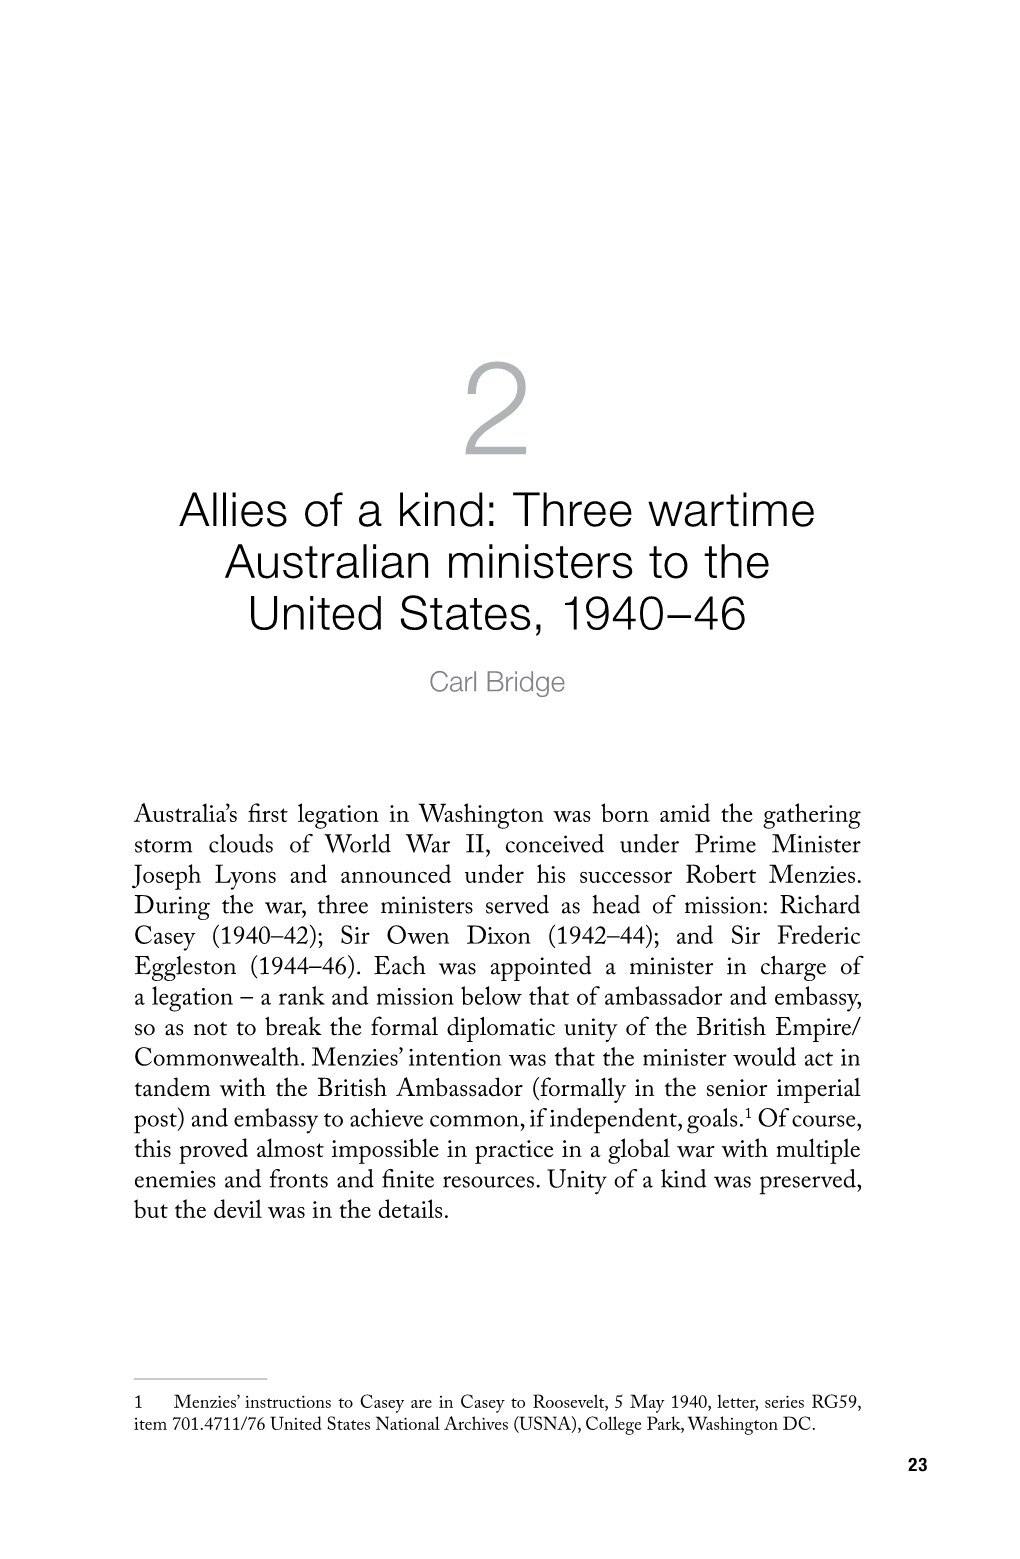 Allies of a Kind: Three Wartime Australian Ministers to the United States, 1940–46 Carl Bridge